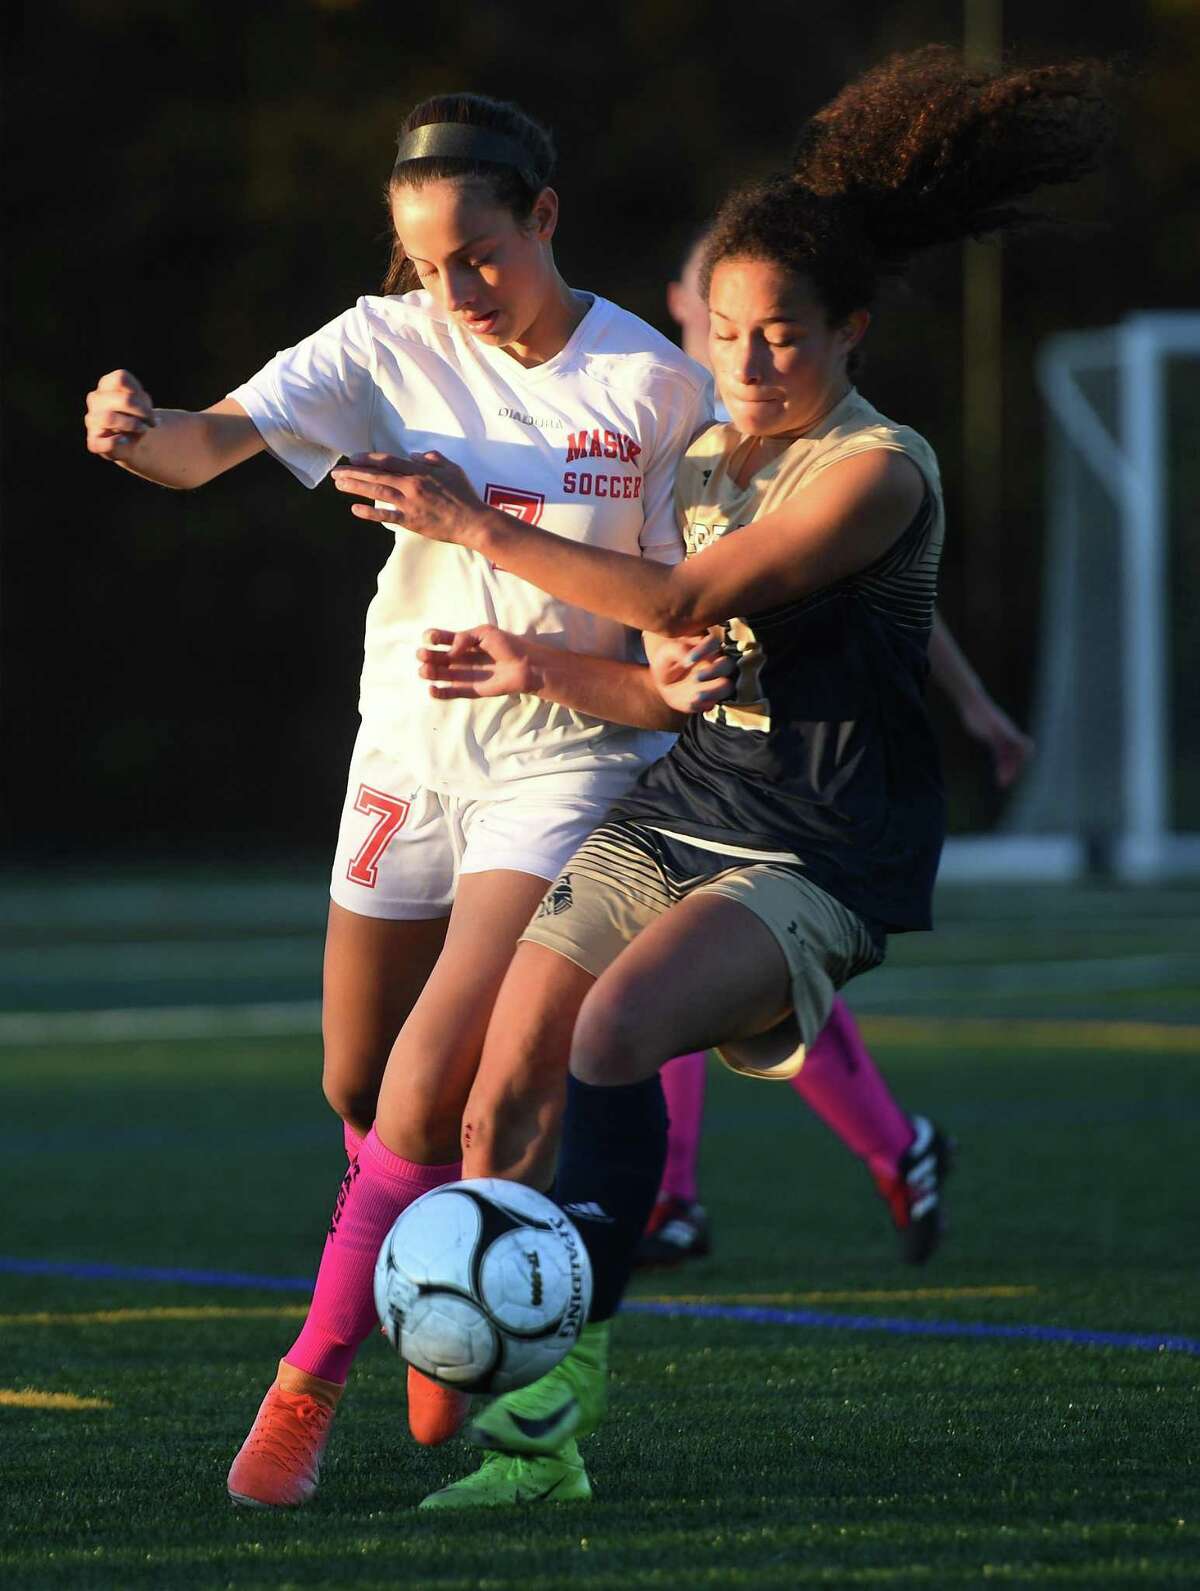 Masuk's Amanda Campos, left, and Notre Dame of Fairfield's Toni Domingos battle for the ball during their 0-0 tie SWC girls soccer match in Fairfield, Conn. on Monday, October 28, 2019.